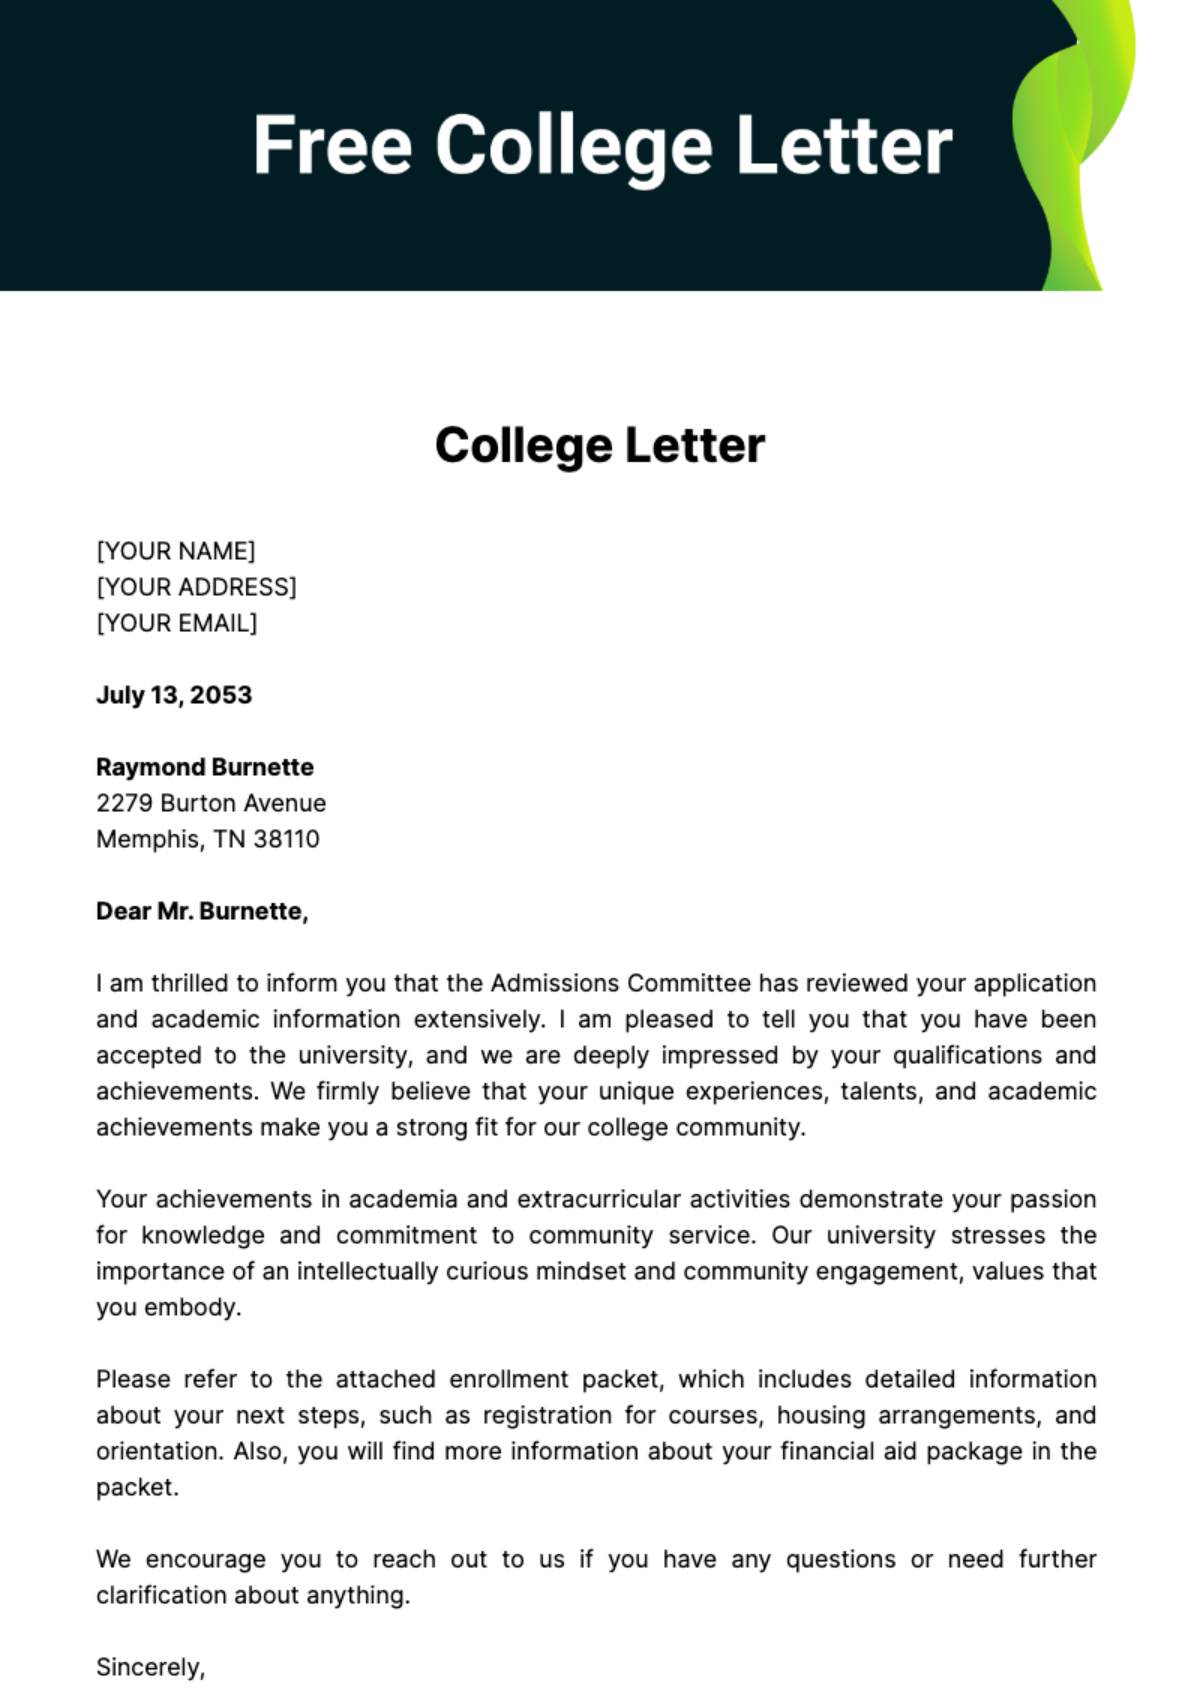 Free College Letter Template